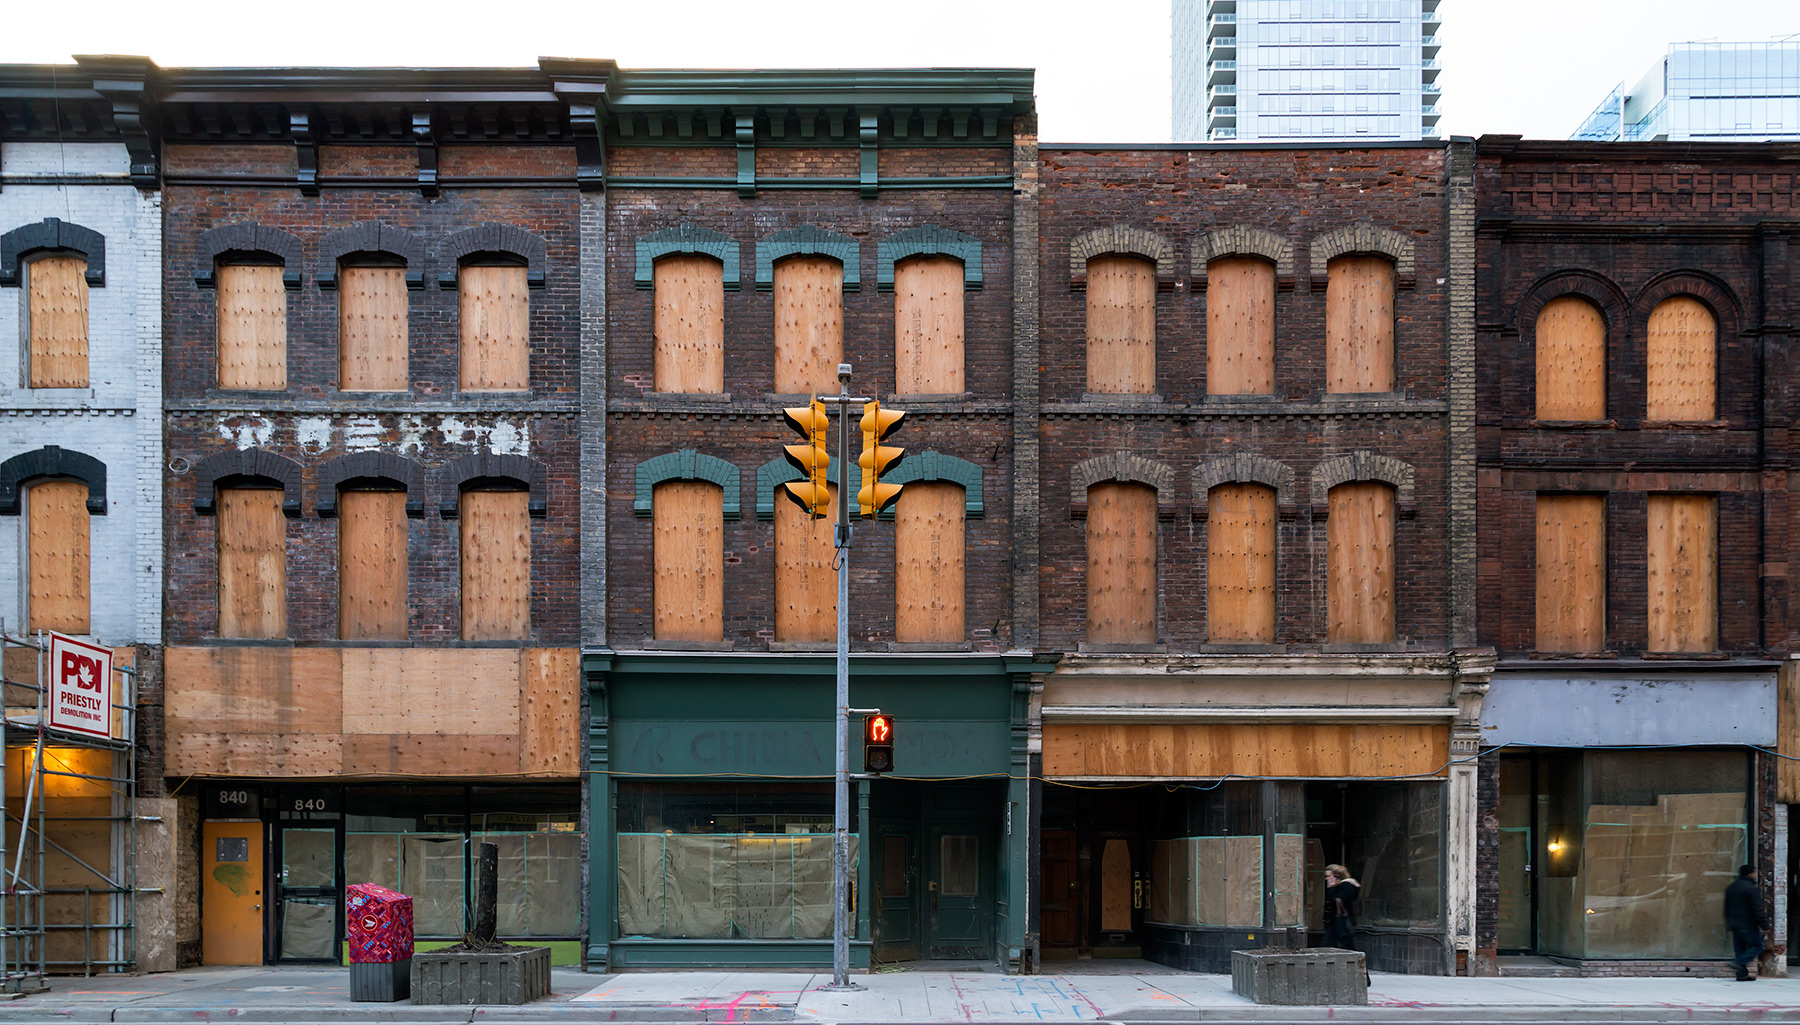 20151214. Another Yonge Street strip facade from behind which th